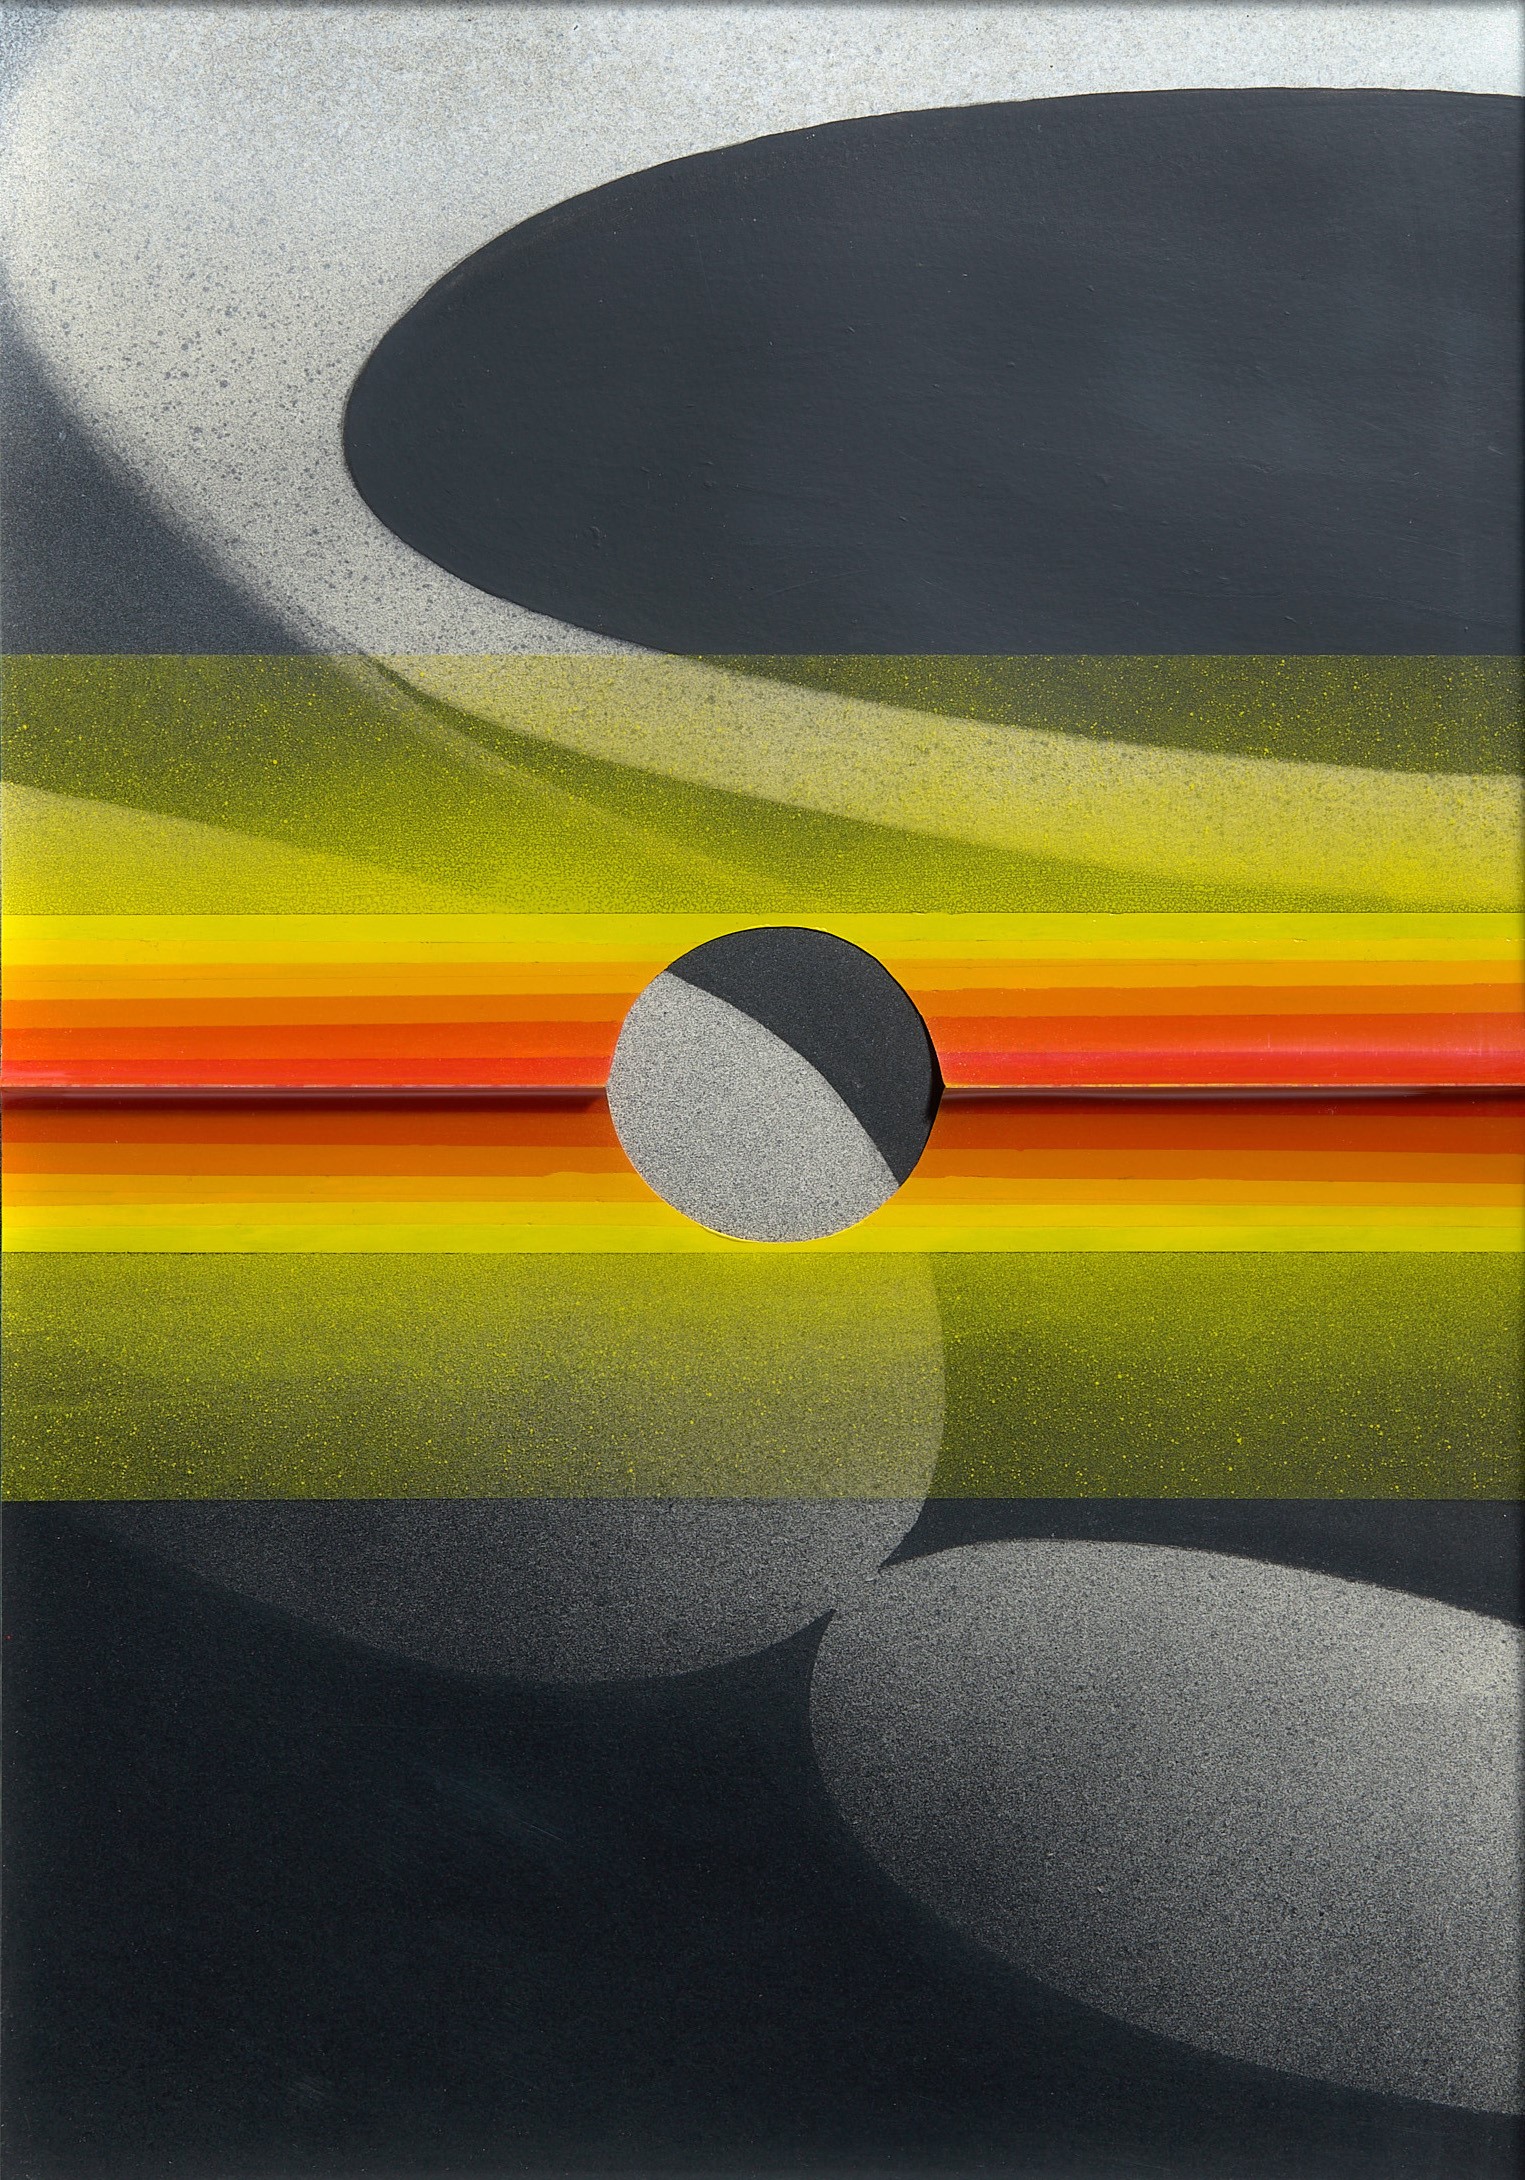 Mark Hislop 'Eclipse 2' graphite, charcoal, synthetic polymer paint, mylar, paper 48 x 34cm $2,000